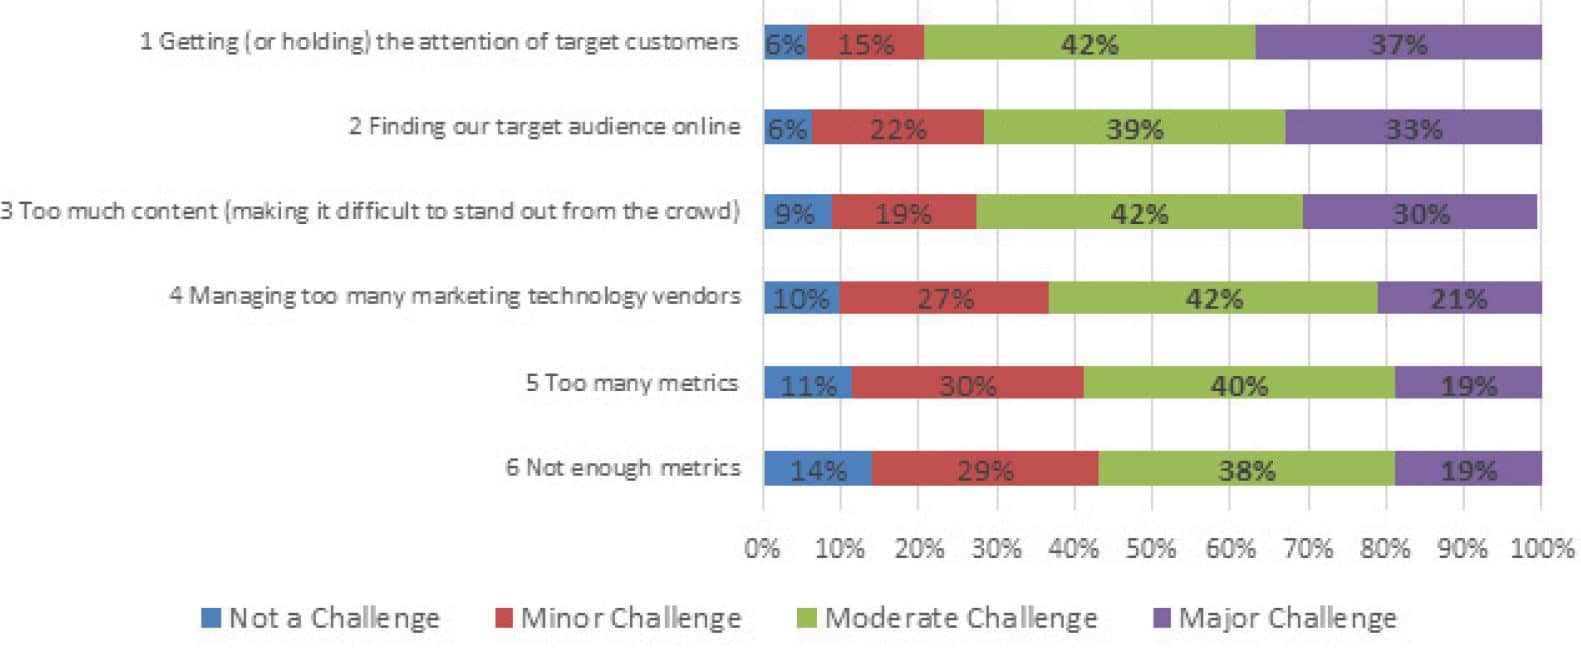 key-challenges-identified-by-marketing-executives